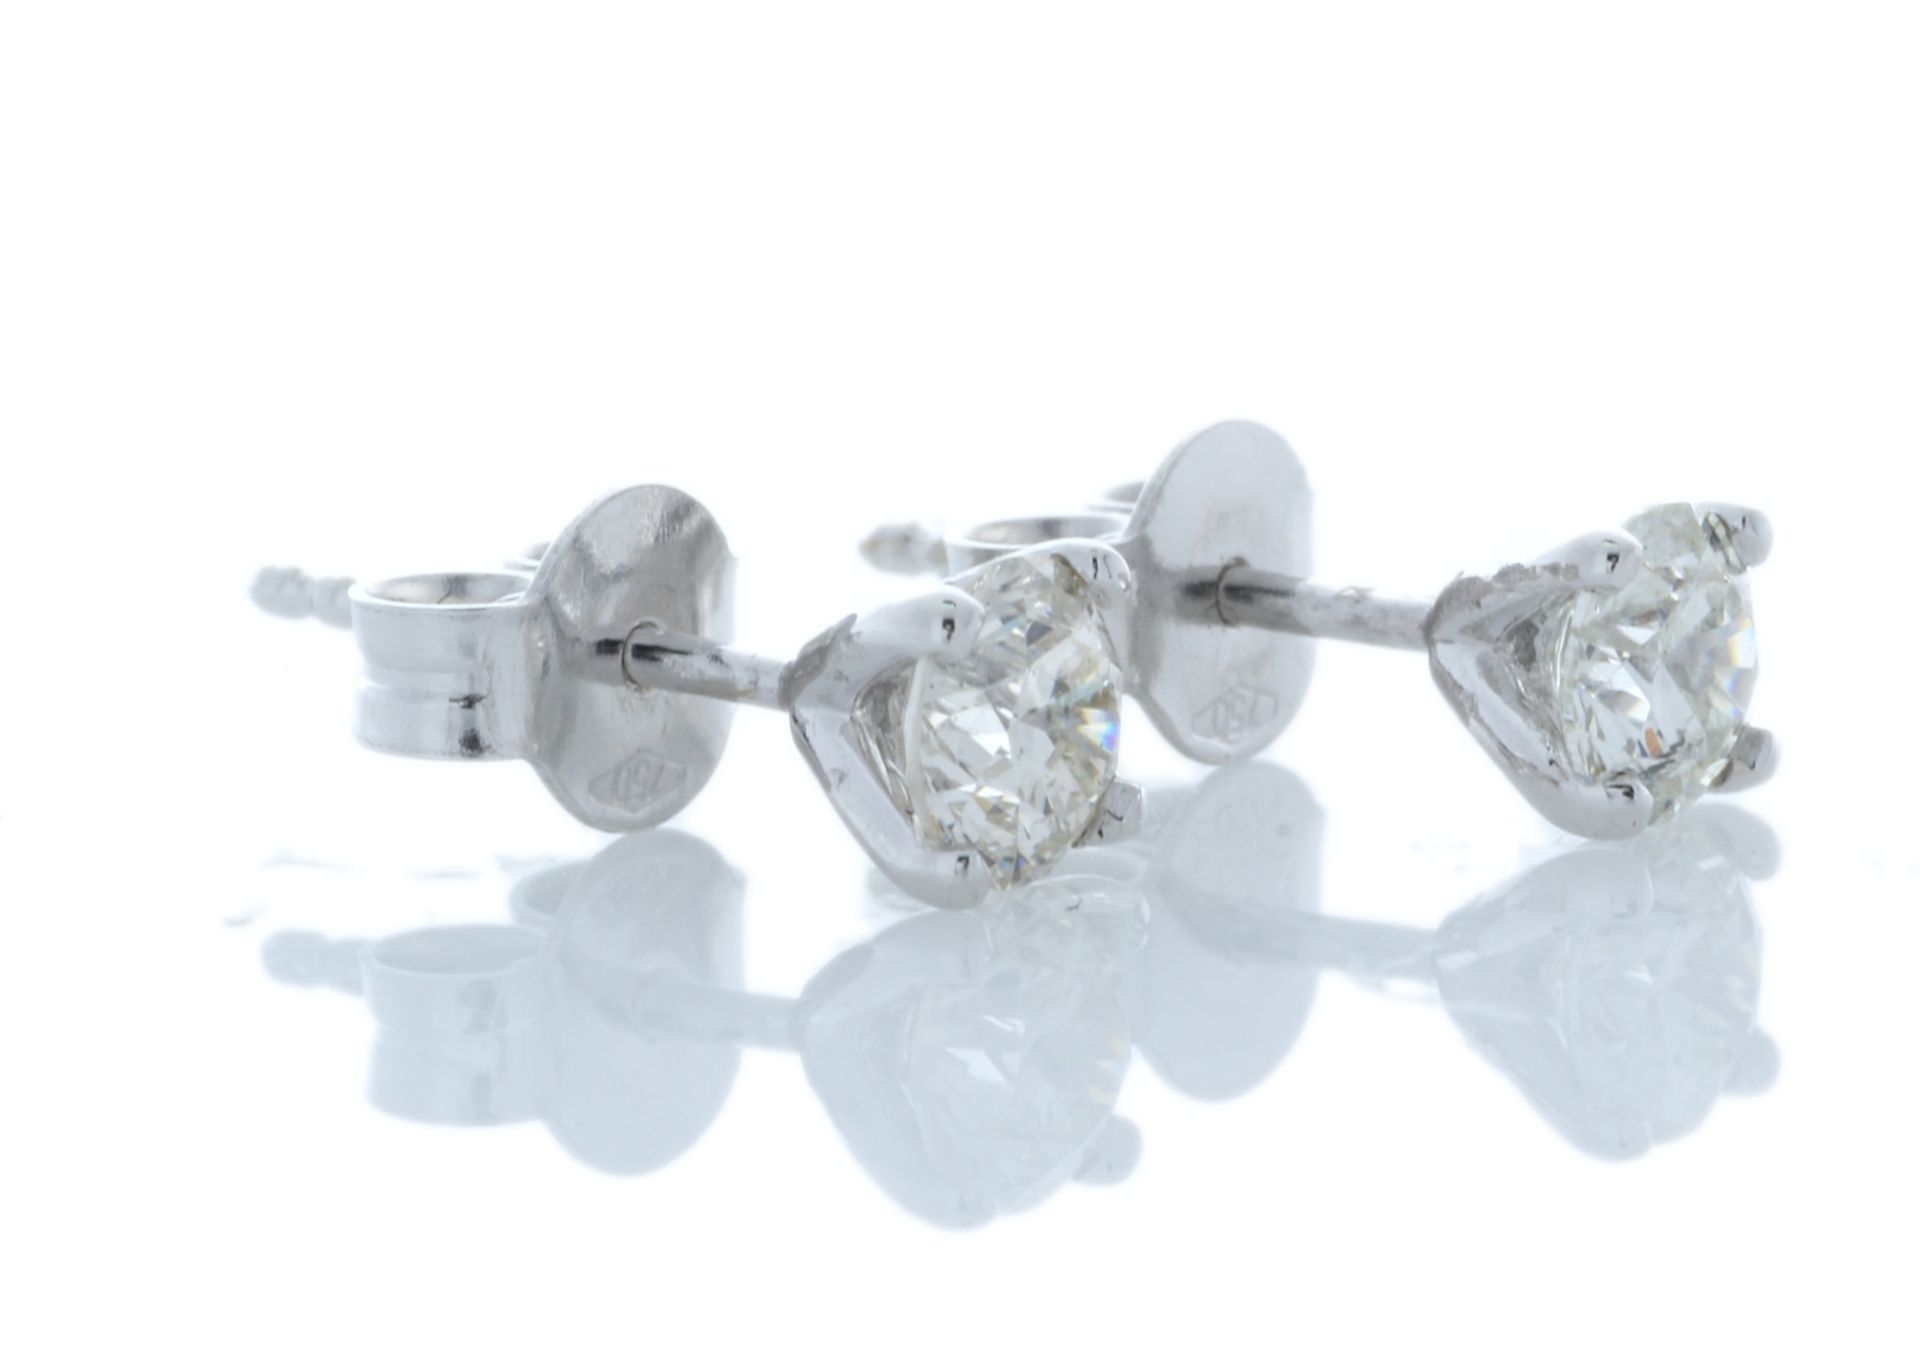 18ct White Gold Wire Set Diamond Earrings 0.80 Carats - Valued By GIE £15,070.00 - These classic - Image 2 of 4